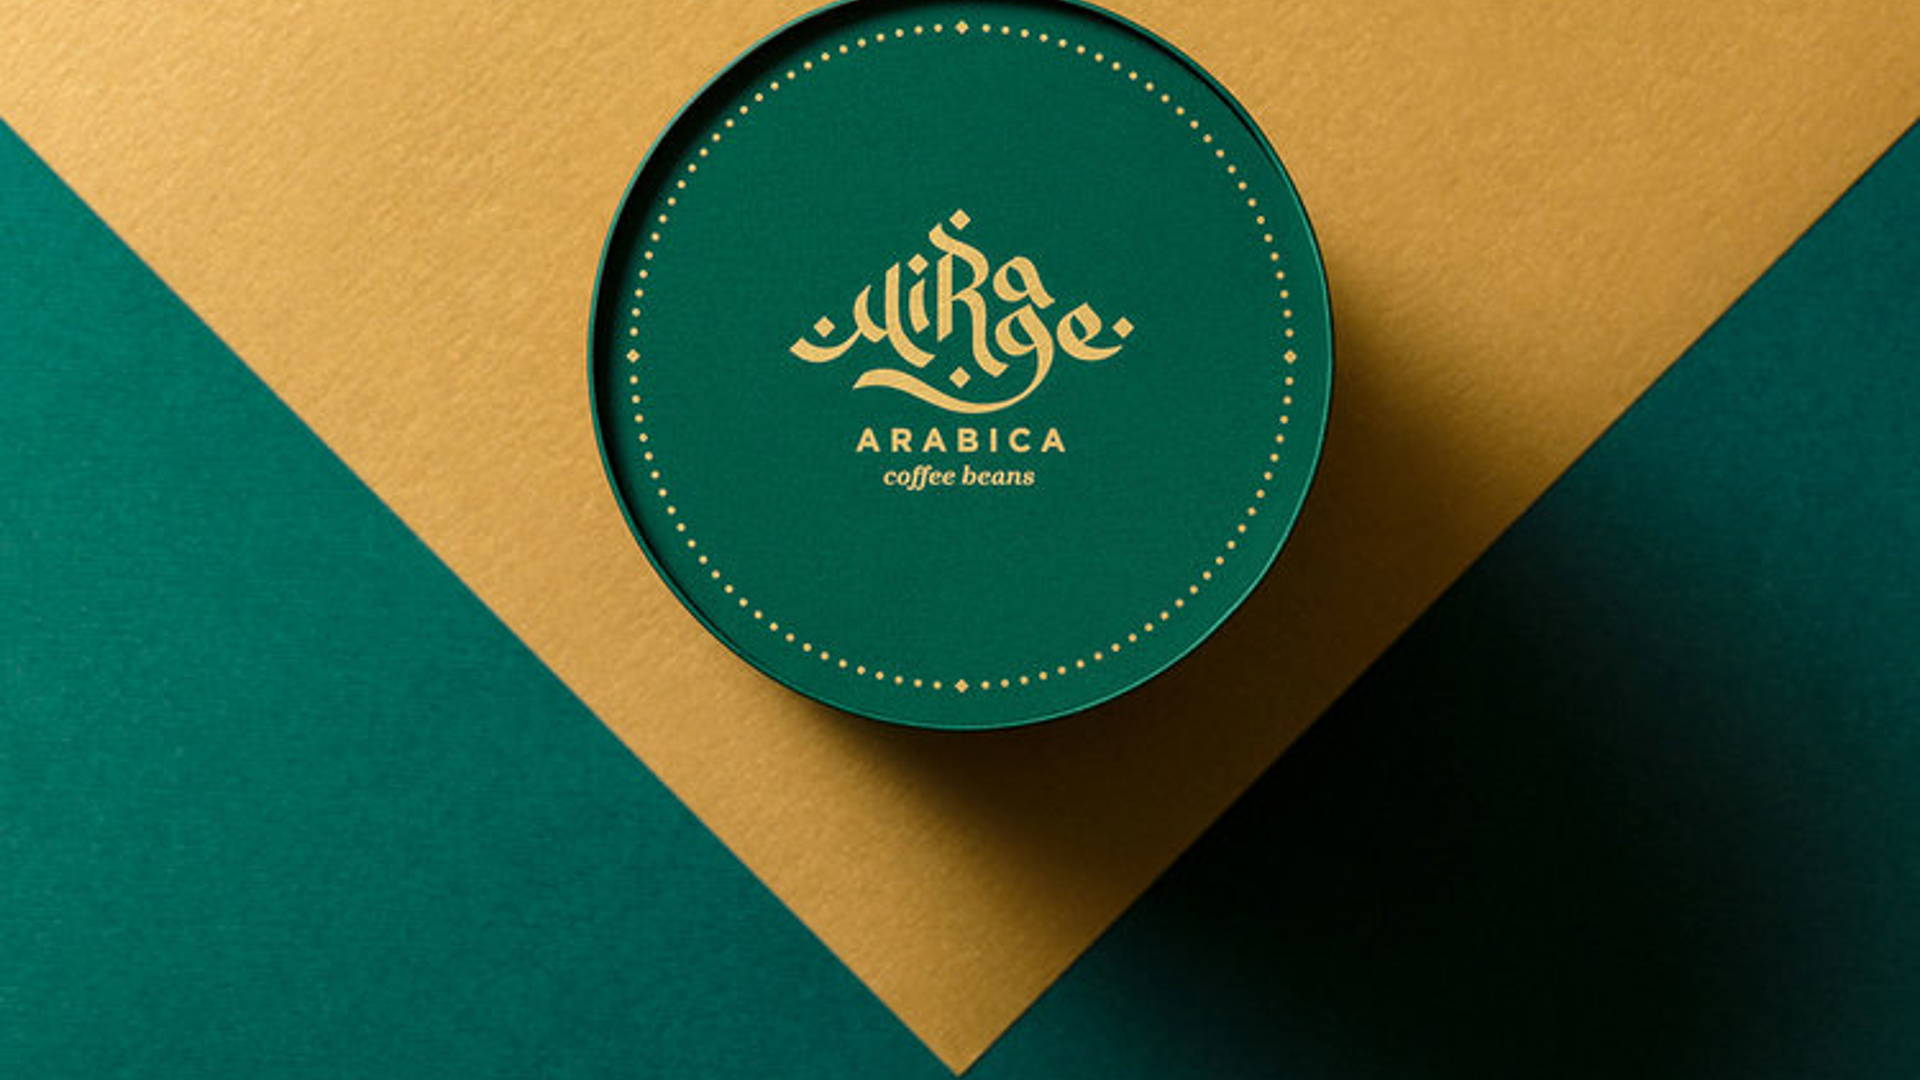 Featured image for This Coffee Branding Concept Creates Simplicity Through Color-Coded System